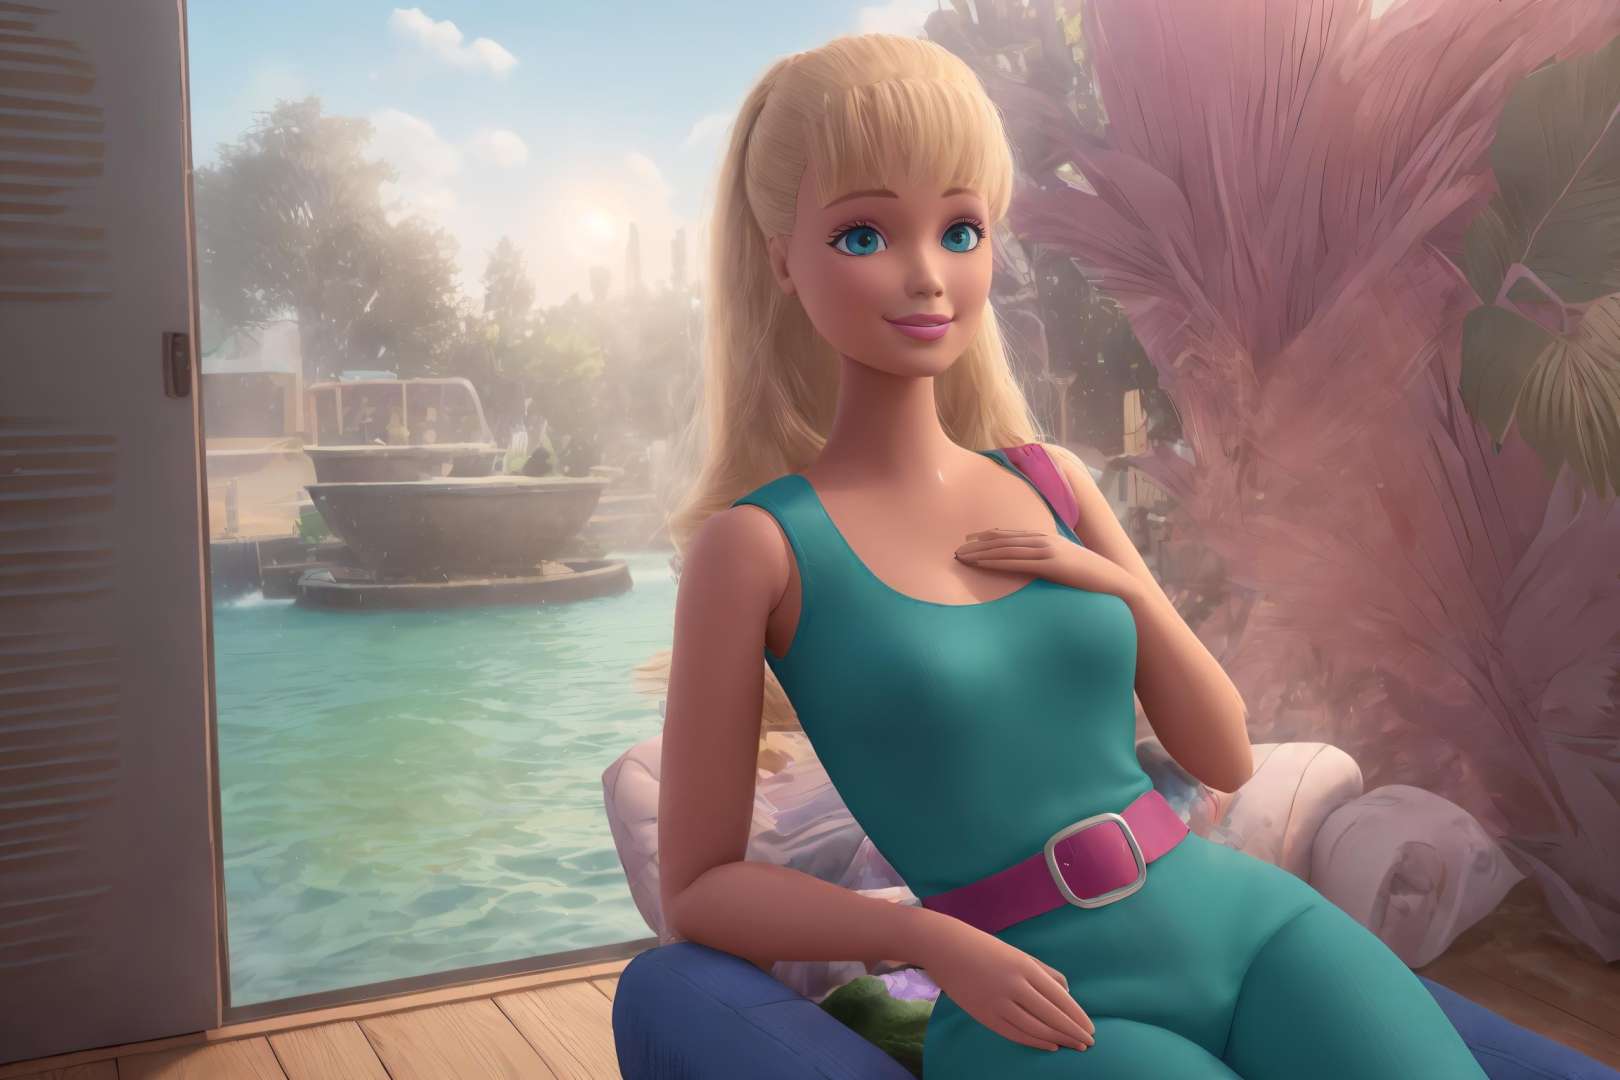 <lora:TS_Barbie-21:0.8>, (masterpiece, best quality), highres, (8k, RAW photo, highest quality), ultra-realistic, 3d, centered, (TS_Barbie), mid shot, (full body:1.2), beautiful, a cartoon girl sitting on a pink sofa in a blue jumpsuit and pink belt in the style of pixar, (legwarms), pink heels, (perfect lighting and composition:1),soft lighting, (high detail, 8K resolution:1), hdr:0.7, detailed face, perfect, (dynamic), pose, (high quality:1.2), plastic skin, ((shiny:1.3)), hourglass figure, smile, (depth of field:0.8), 50mm, film grain:0.7, fujifilmXT3, focus face, looking at viewer, (detailed eyes), floating particles, analog style, beautiful, light makeup, lipstick, (thick waist, thick arms, thick thighs:0.6), summer vacation, tropical, amazing composition, lively, ((volumetric lighting)), halation:0.5